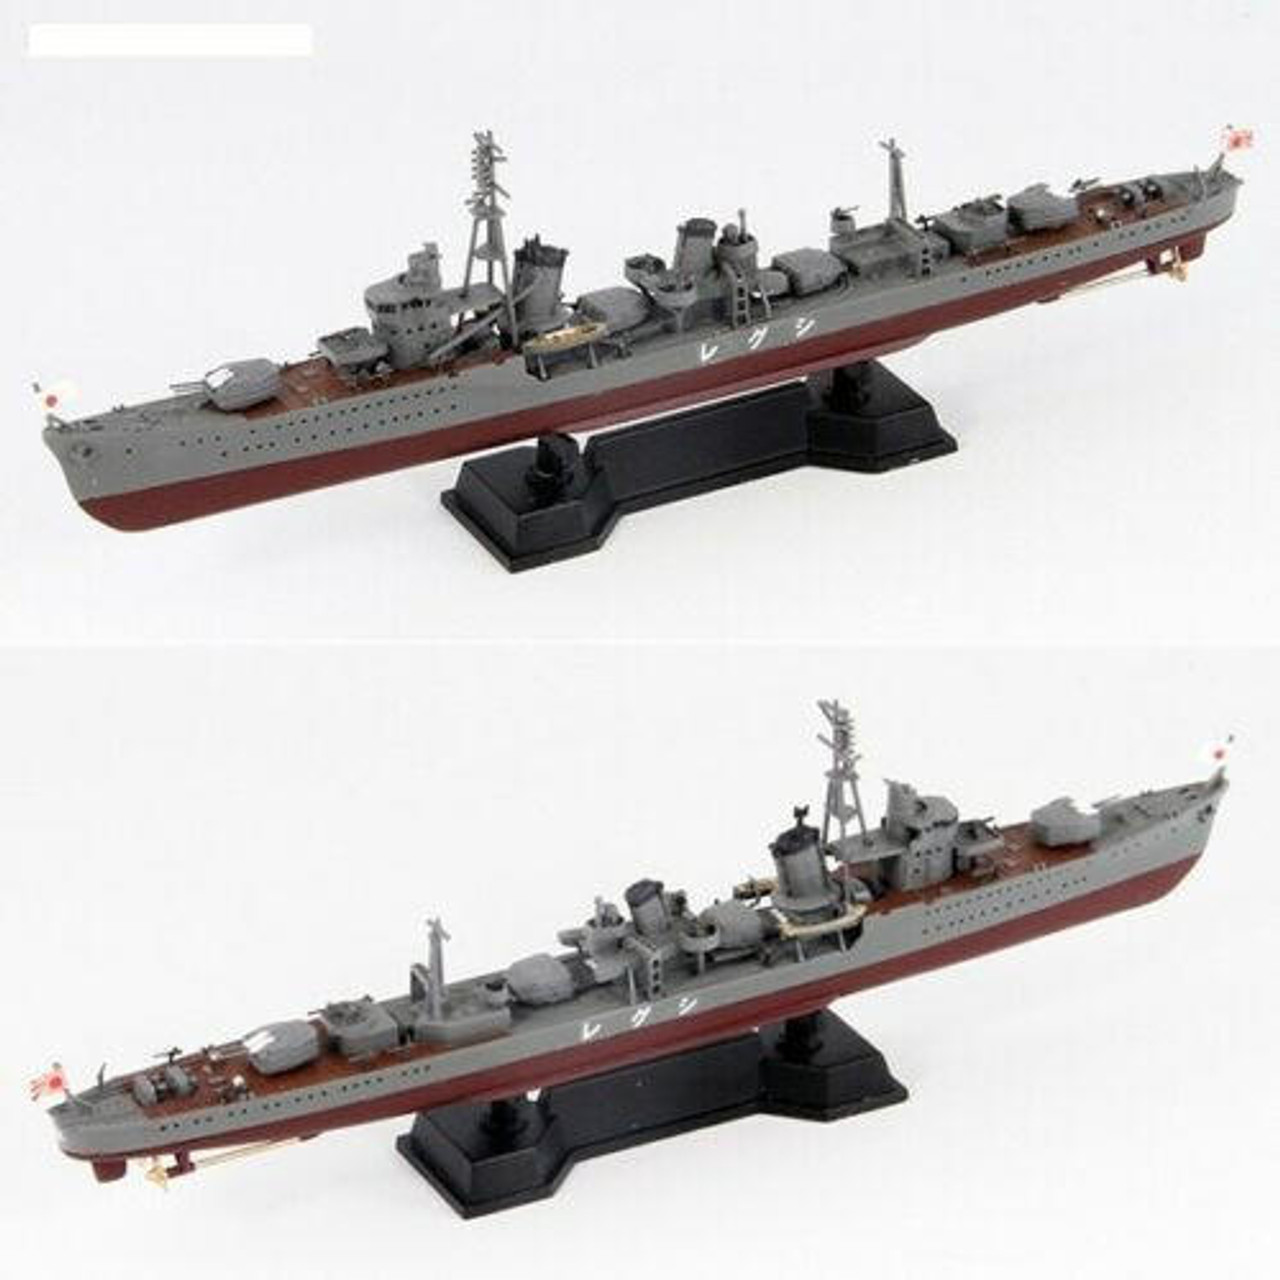 PITSPW45 1/700 Pitroad IJN Destroyer SHIGURE Full Hull Version with new equipment parts set  MMD Squadron